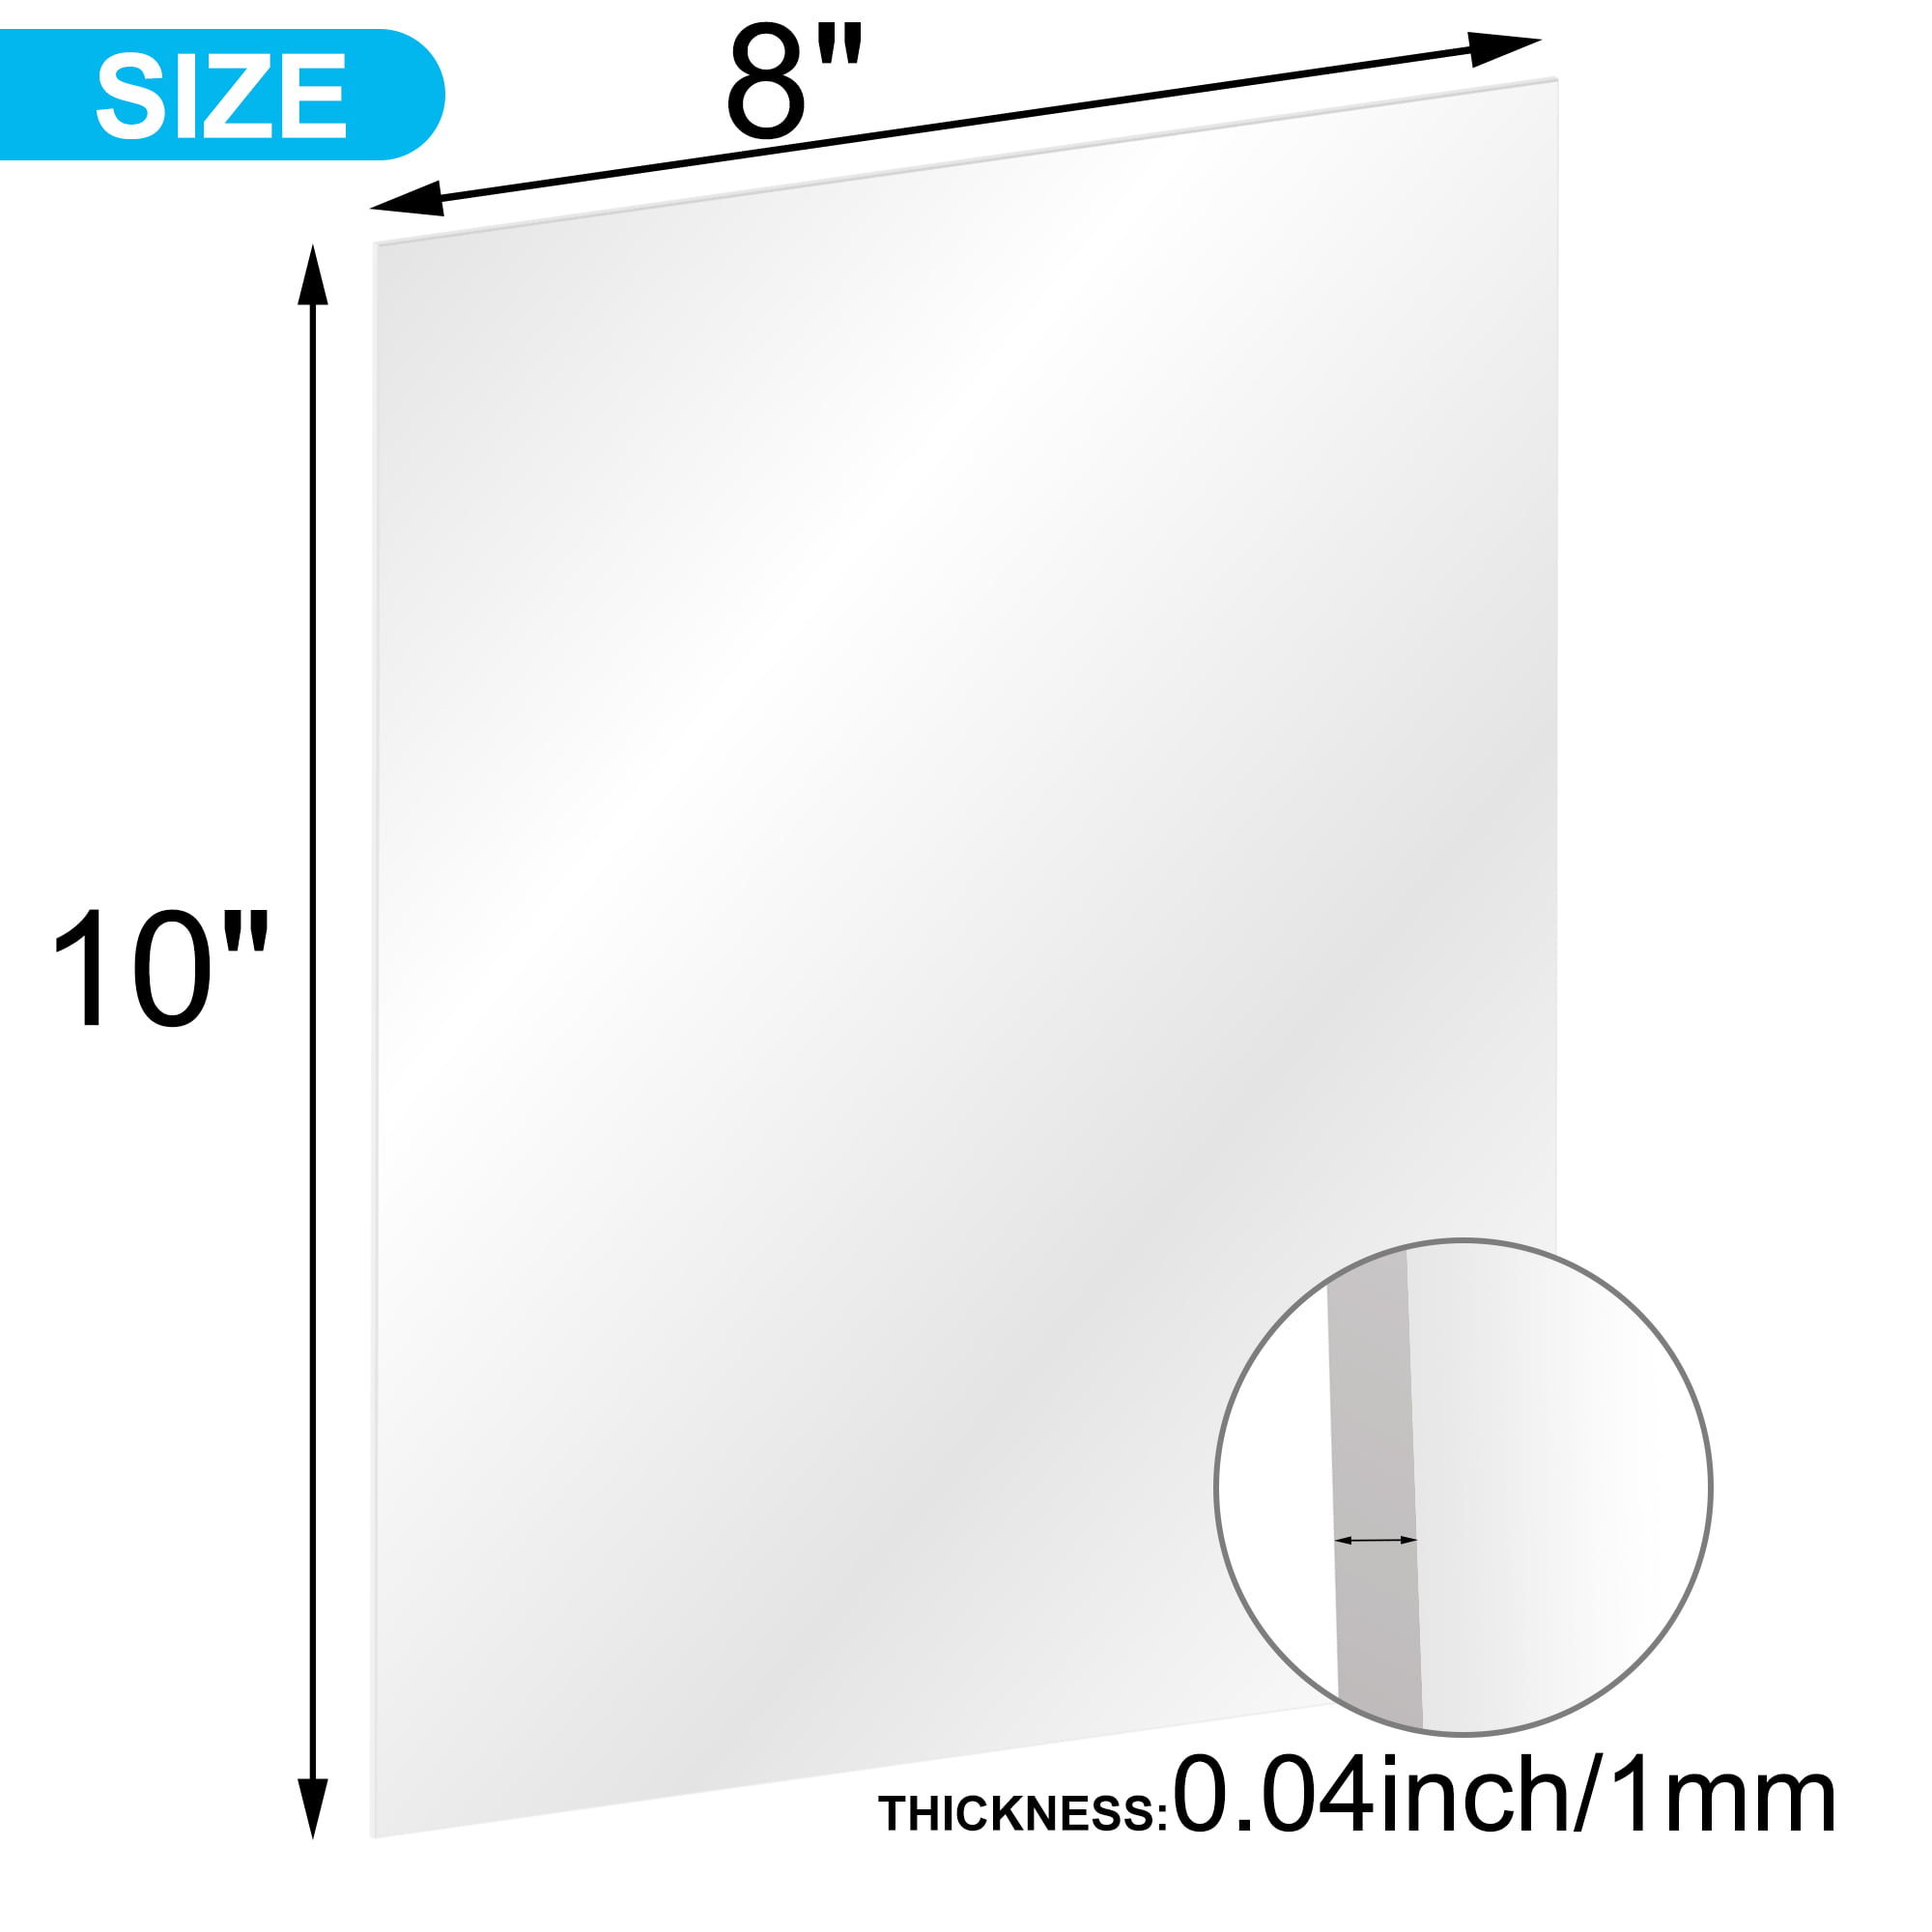 Bedexut 5 Pack 8x10 Plexiglass Sheet 1mm Thick Cricut Cutting Special Signs for Wedding,Festival,Party,Office. Clear PETG Panels for Craft Projects,Replacement Picture Frame Glass and Resin Art